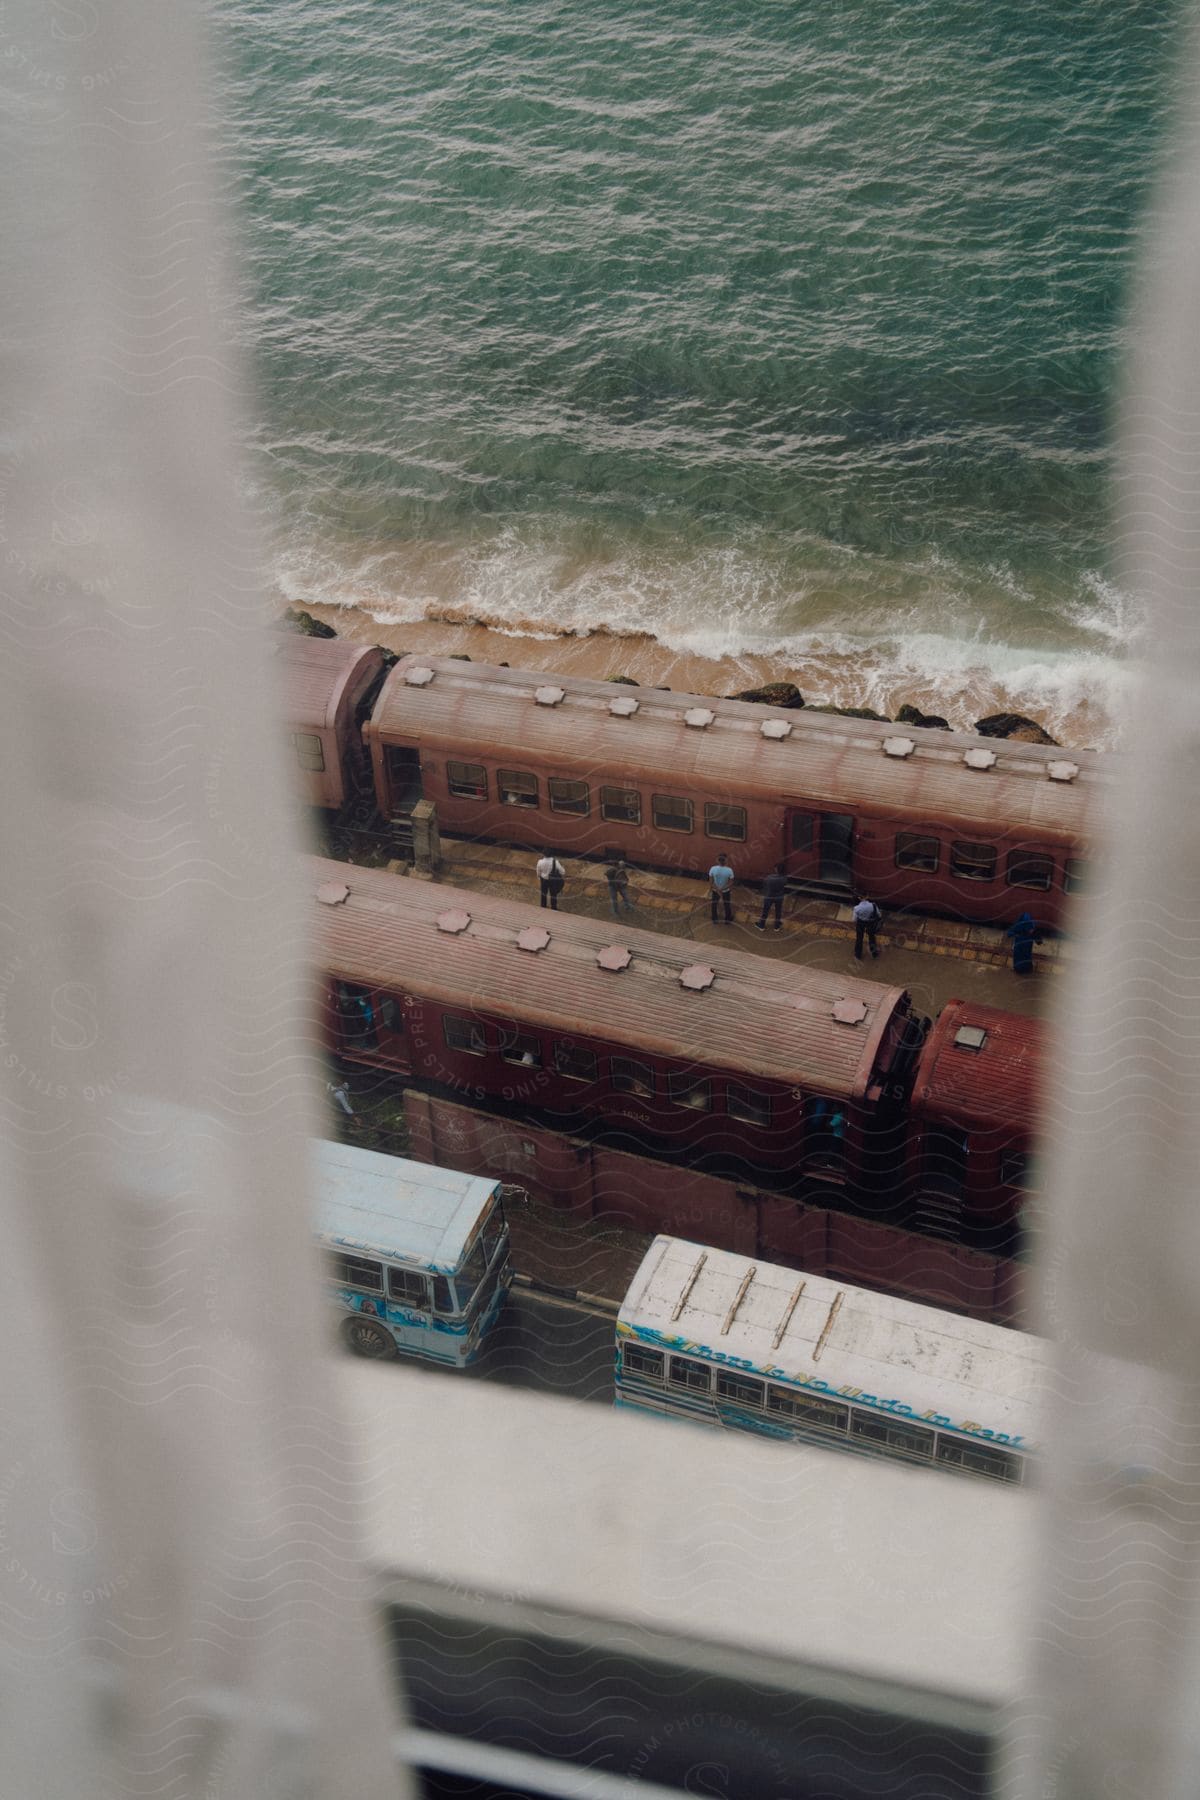 An elevated view through a narrow gap between the curtains of a window reveals a red train with people on it, parked next to the sea.